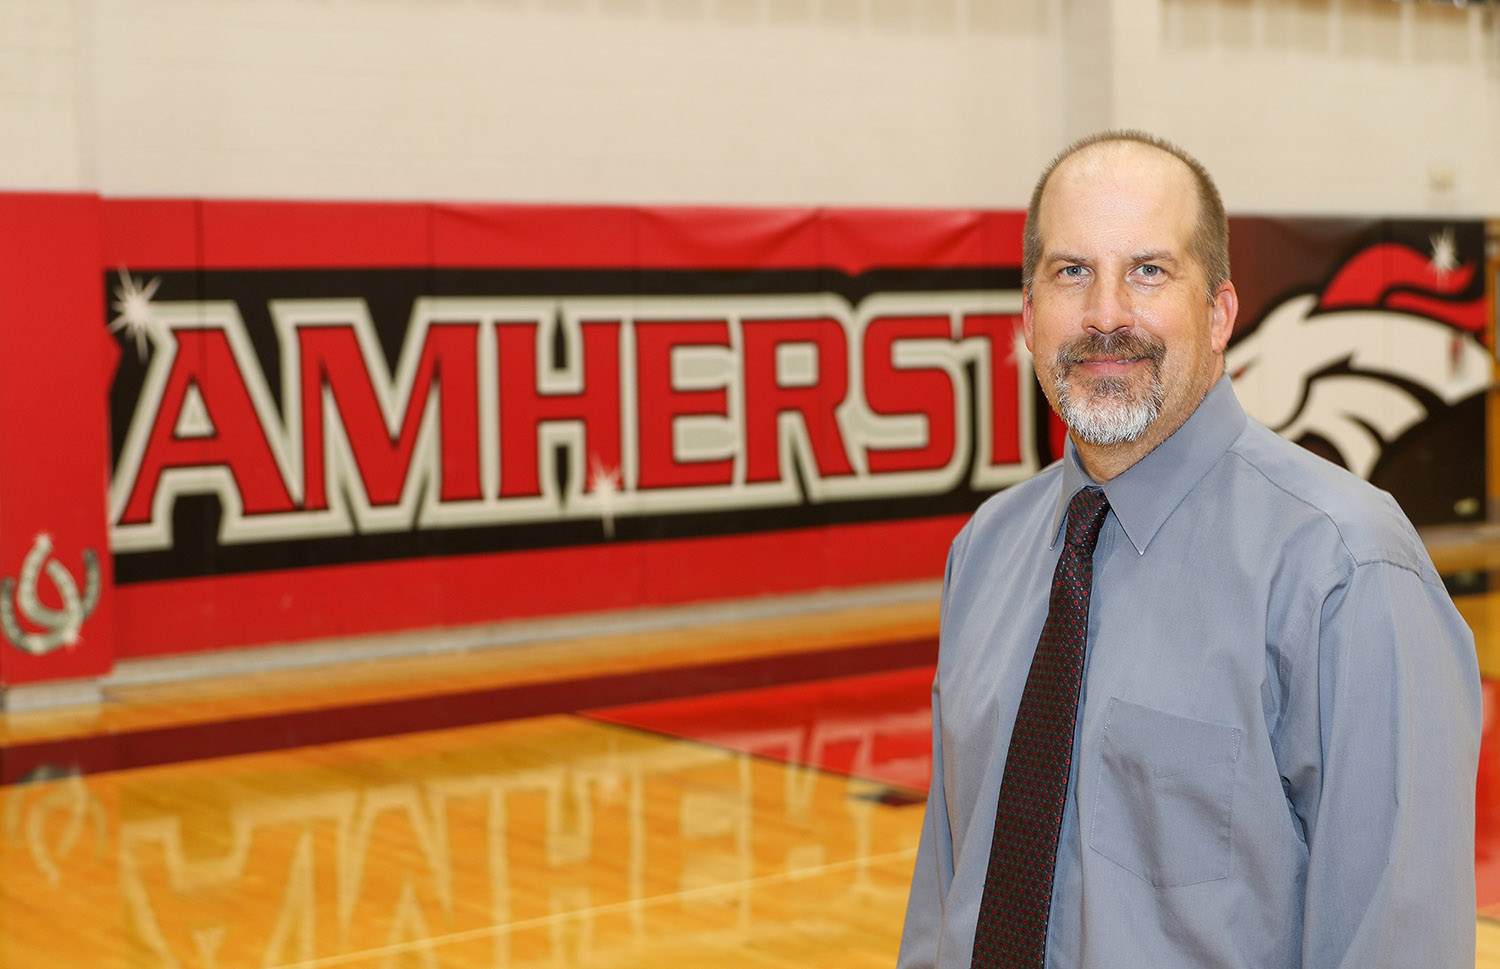 Amherst Public School 7-12 Principal Roger Thomsen frequently turns to UNK students when he needs substitute teachers. “The students who have full days available, we’re bringing them in as much as possible,” Thomsen said.